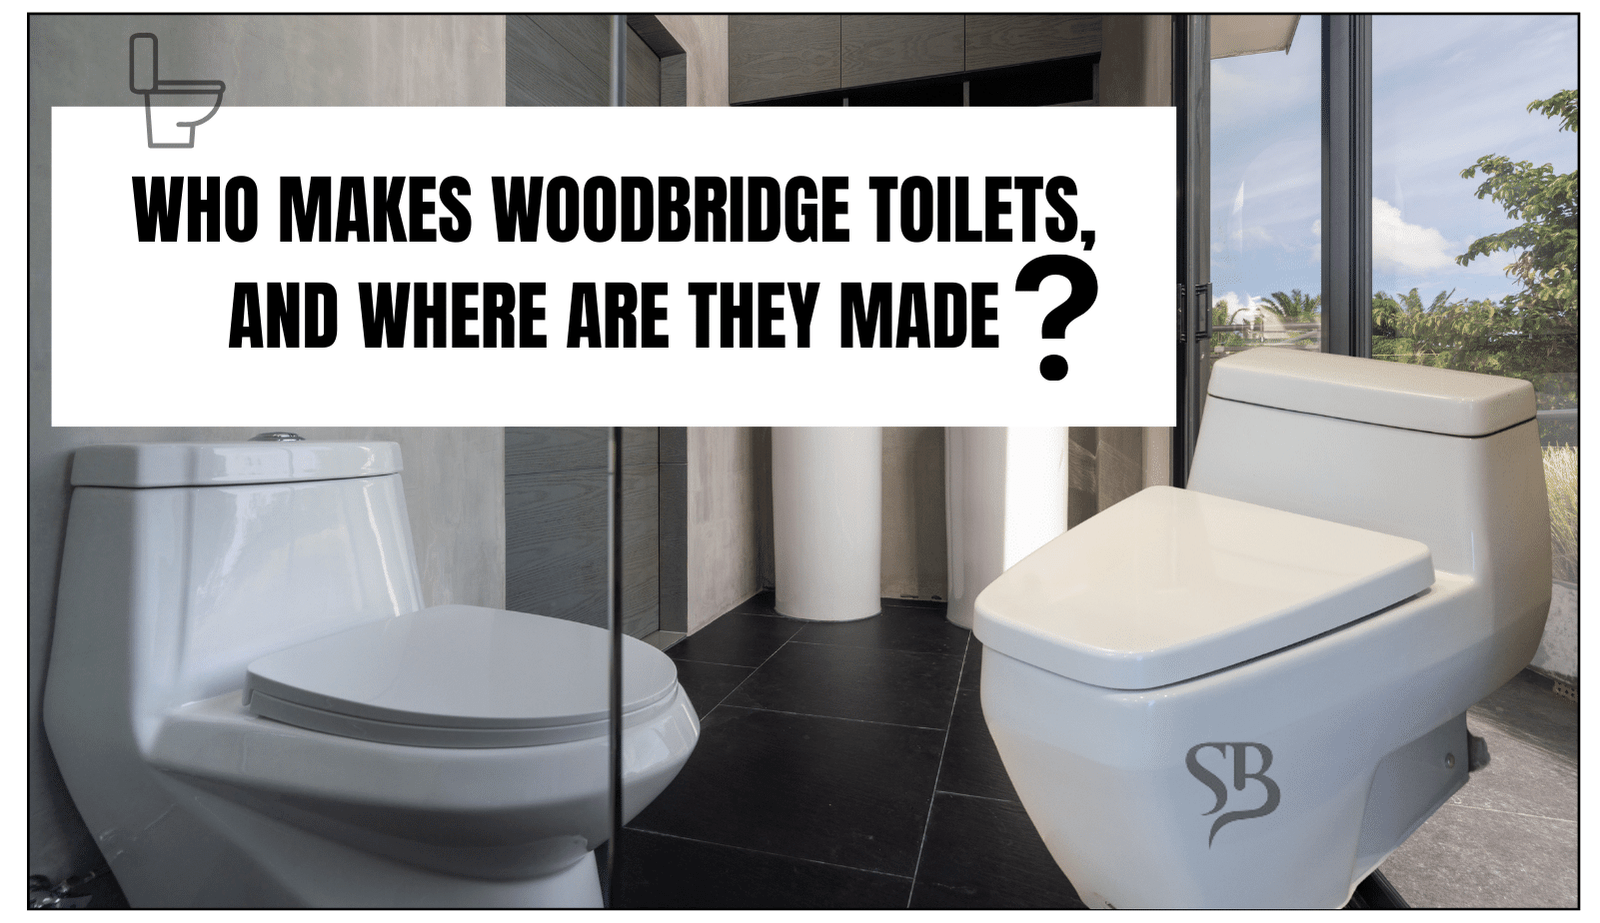 Who Makes Woodbridge Toilets, and Where are They Made?